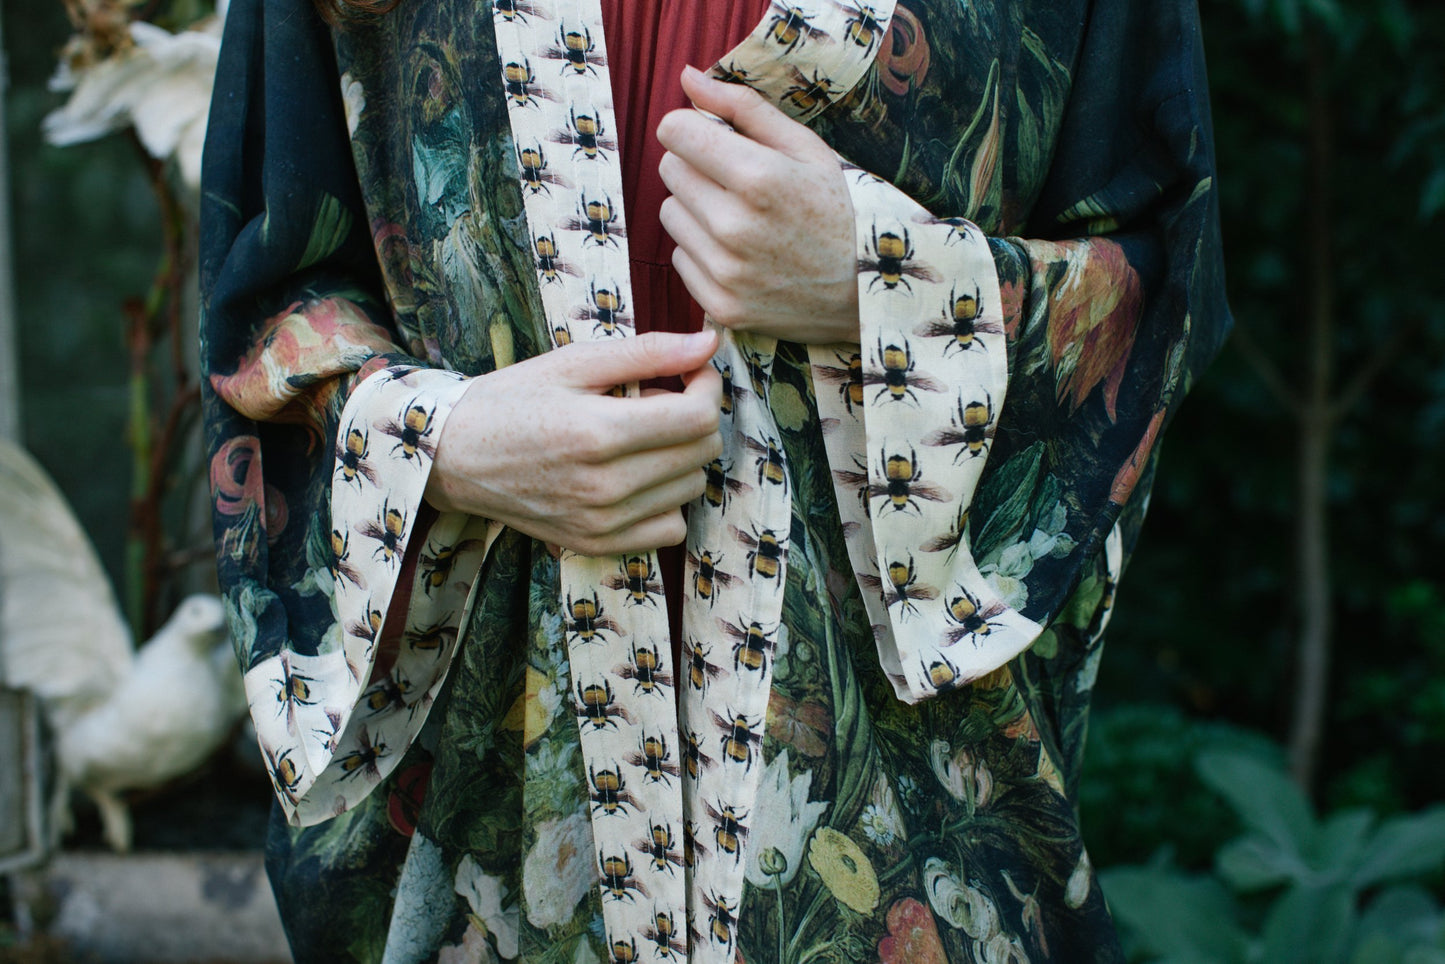 'I Dream in Flowers' Bamboo Duster Kimono Robe with Bees by Market of Stars